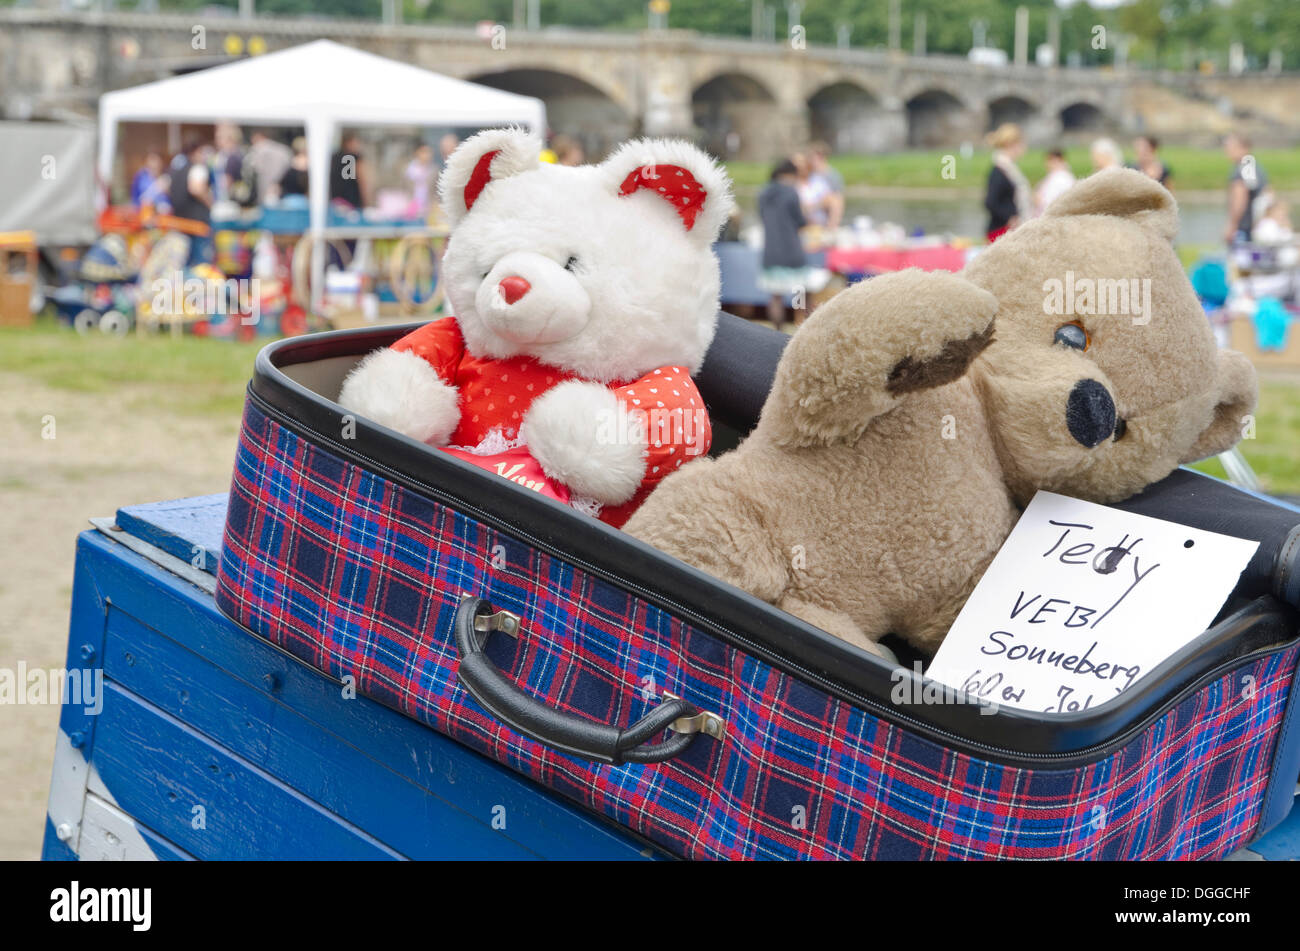 Teddy bears are offered for sale at the weekly flea market, Dresden, Saxony Stock Photo